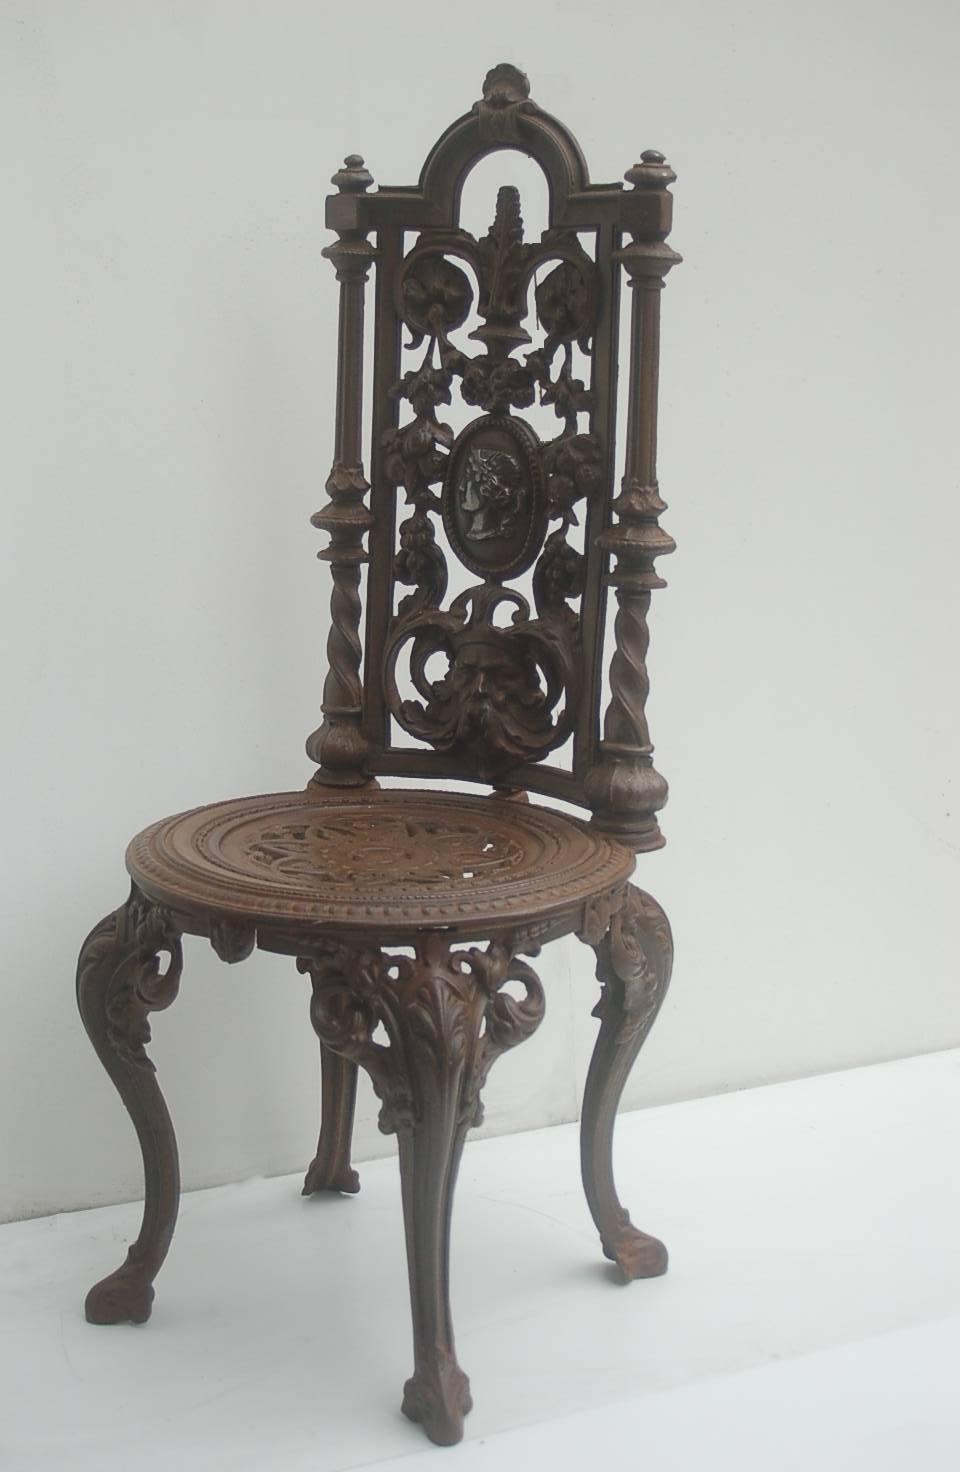 This rare chair of Napoleon III period is quite representative of a time when garden furniture were made of iron. This one has a perforated decoration. The seat is decorated with an interlaced rosette motif. The backrest is decorated with fruits,